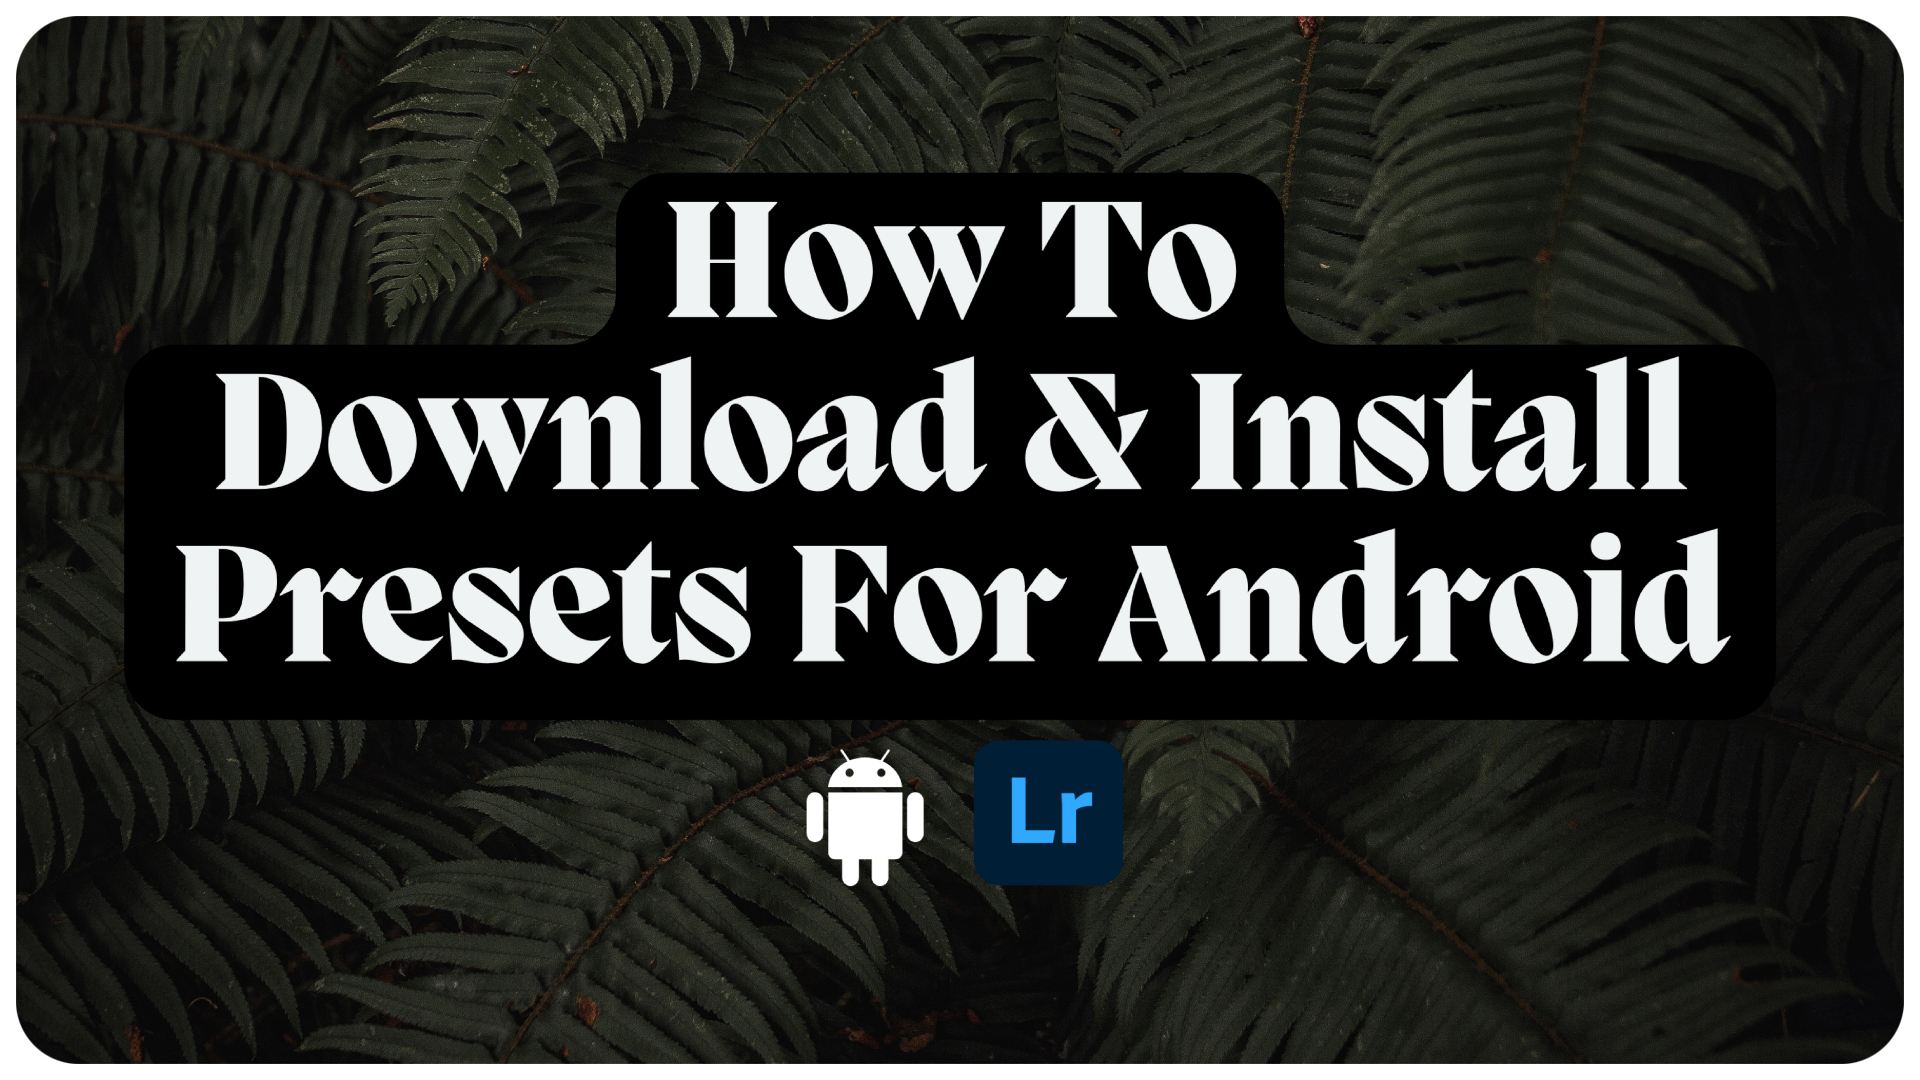 Android Install - Lou & Marks Presets